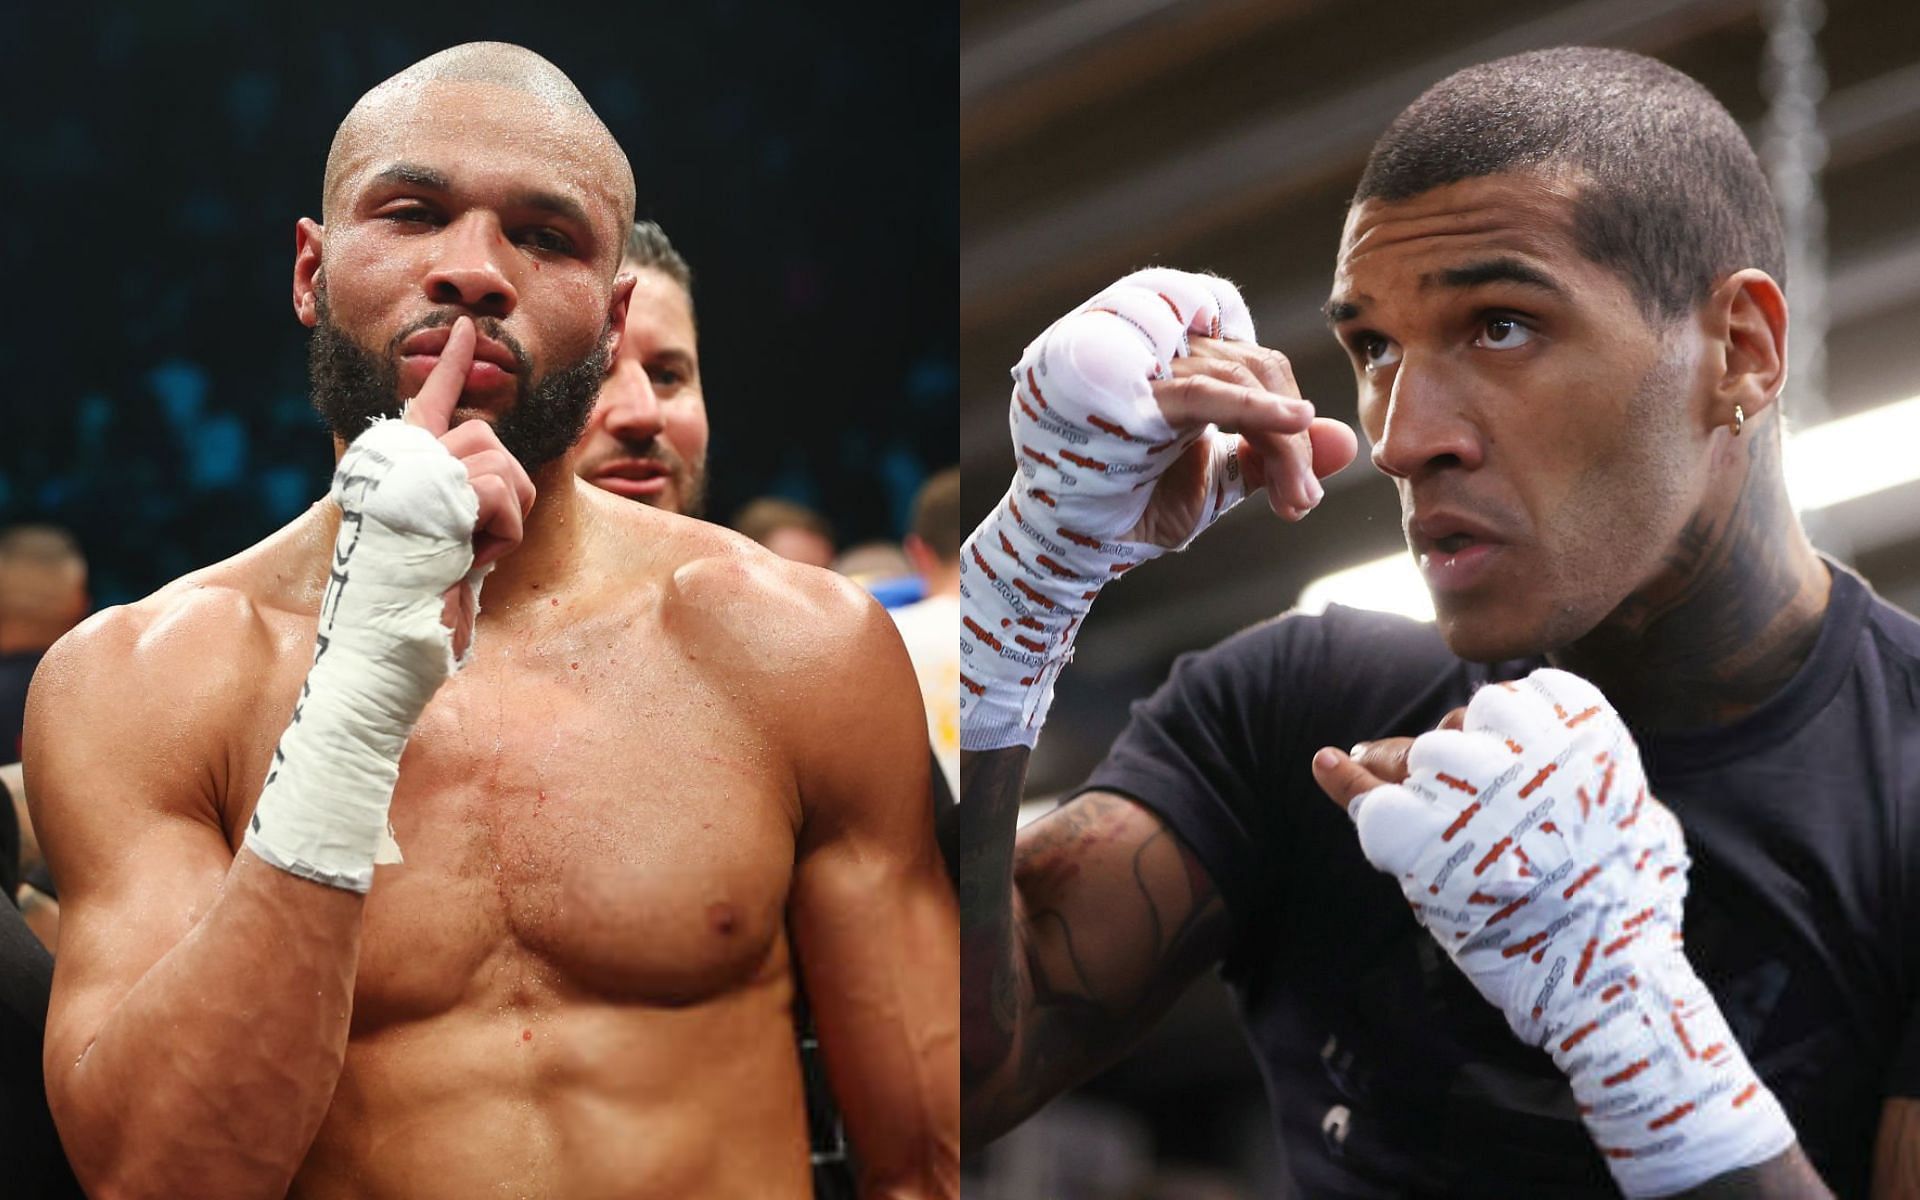 Chris Eubank Jr. (left) and Conor Benn (right) [Images Courtesy: @GettyImages]